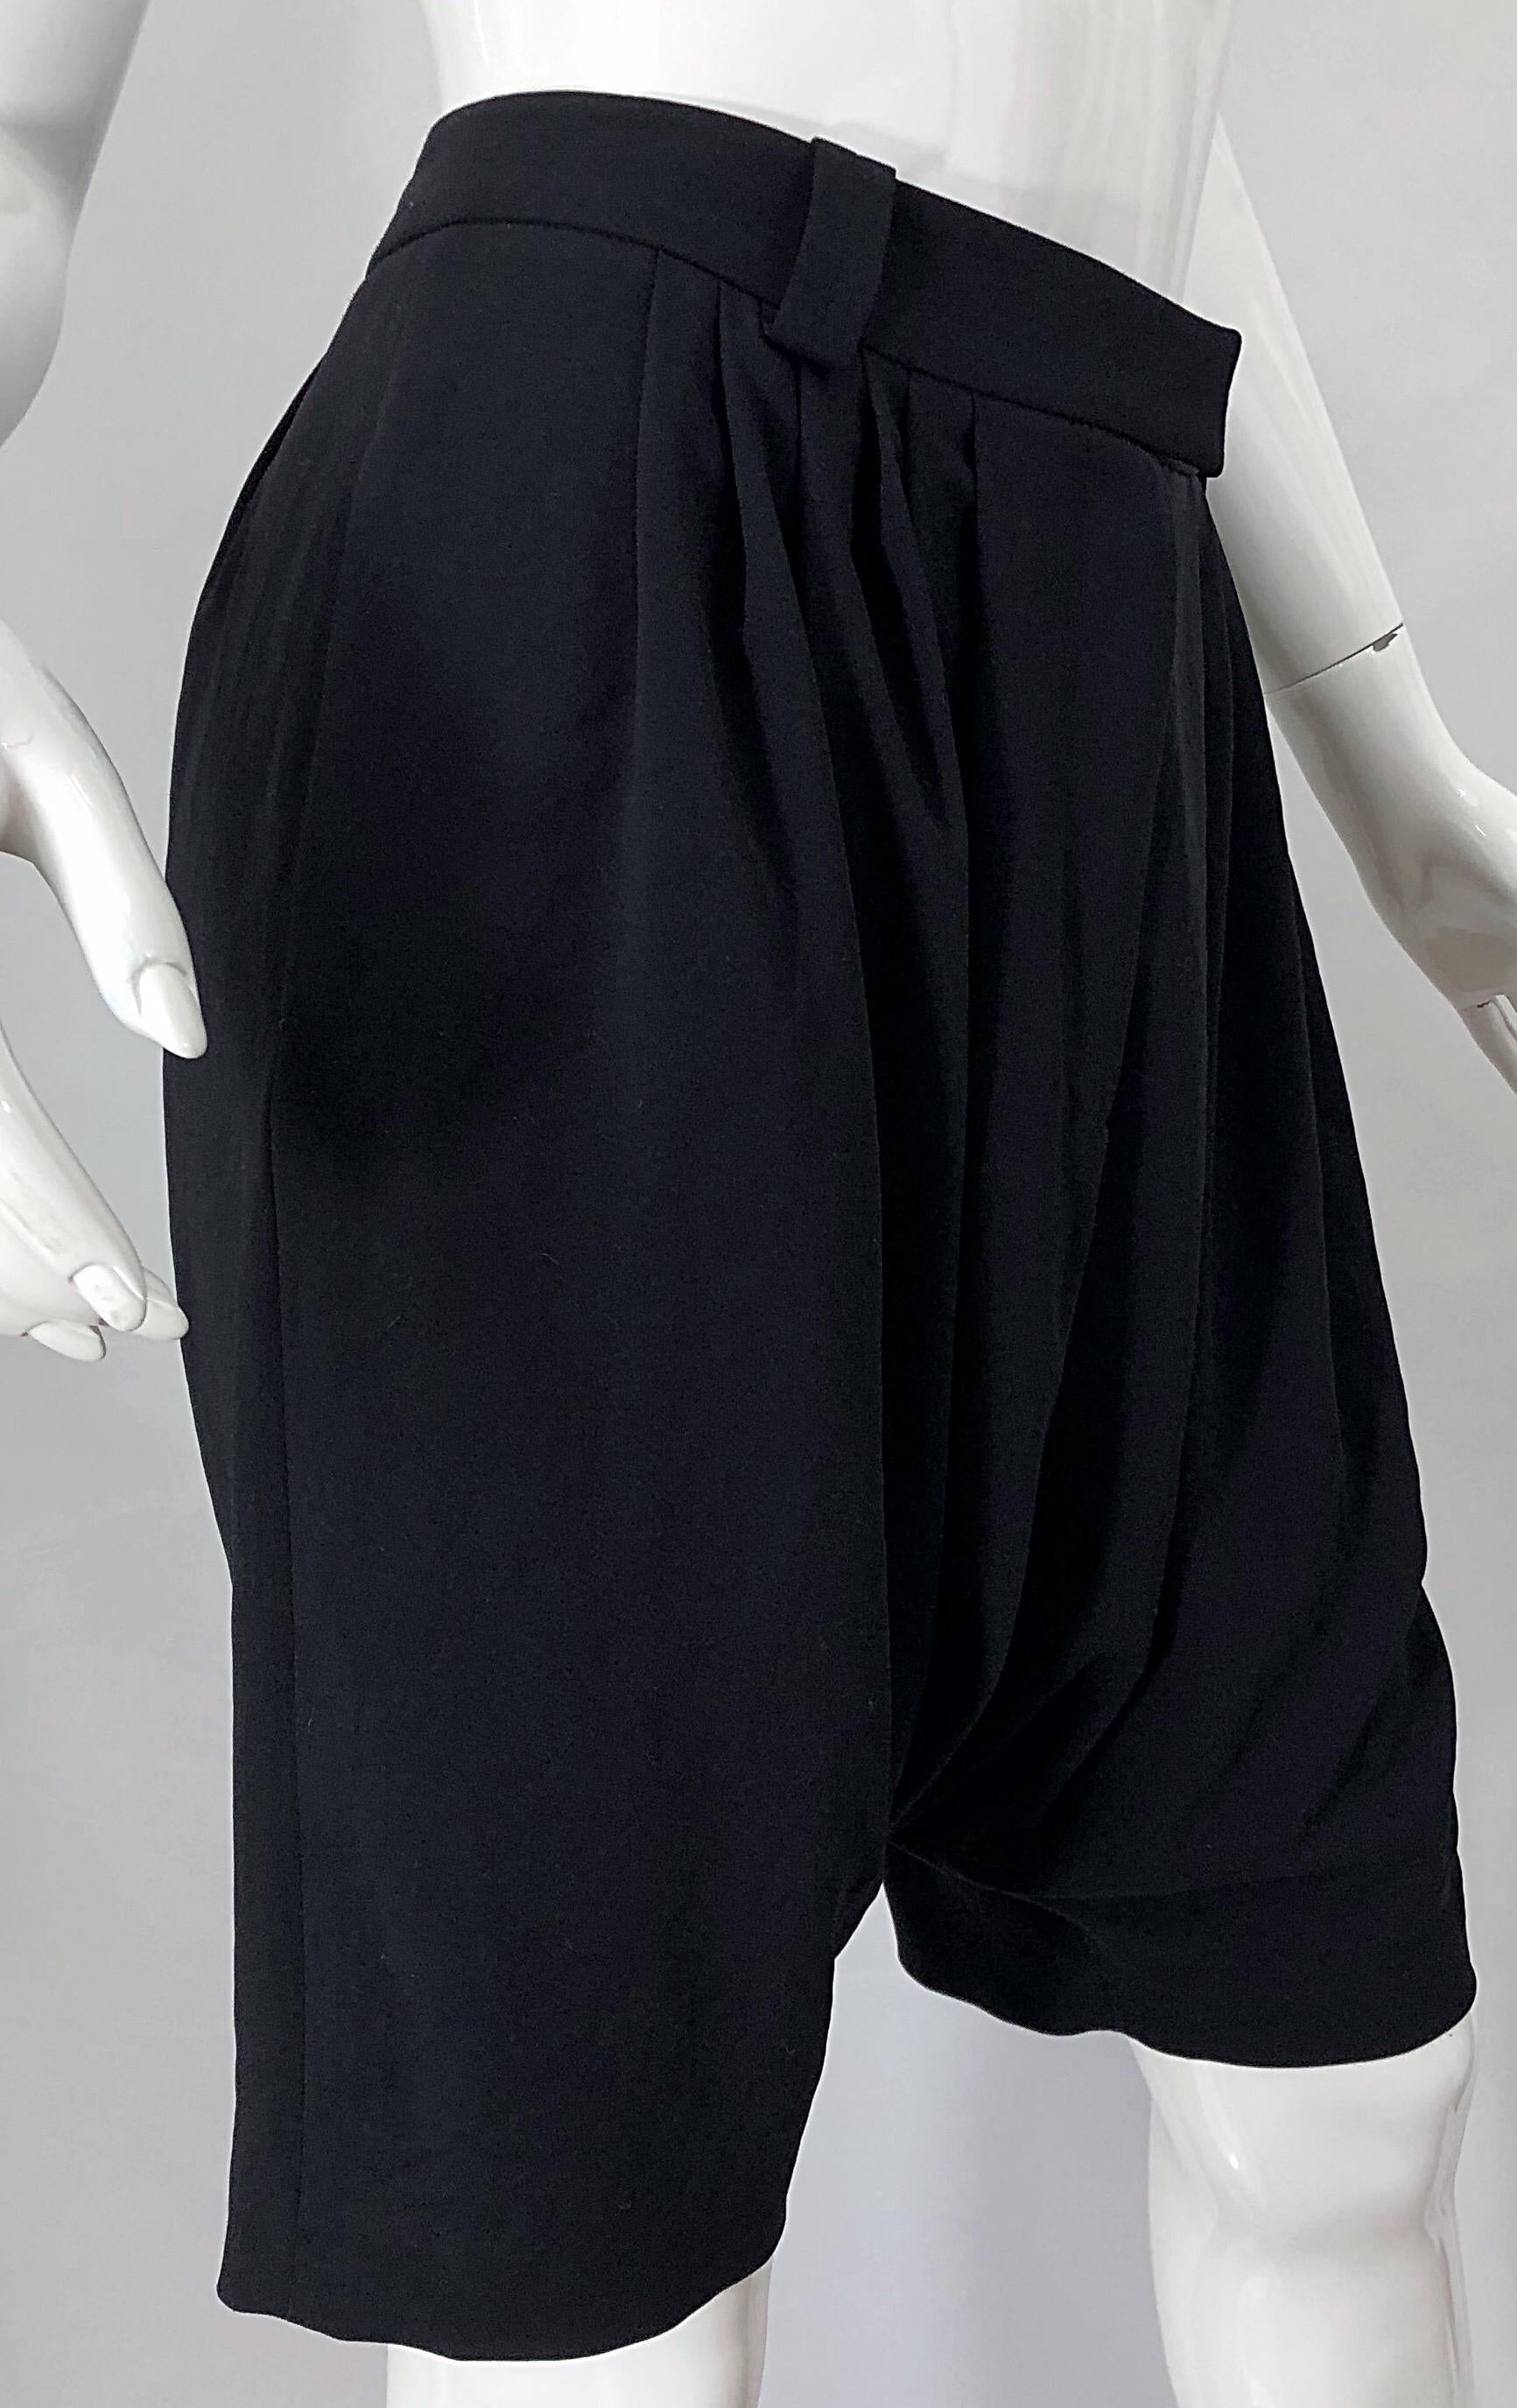 NWT Givenchy by Clare Waight Keller Size 40 / 8 Black Drop Crotch / Waist Shorts For Sale 4